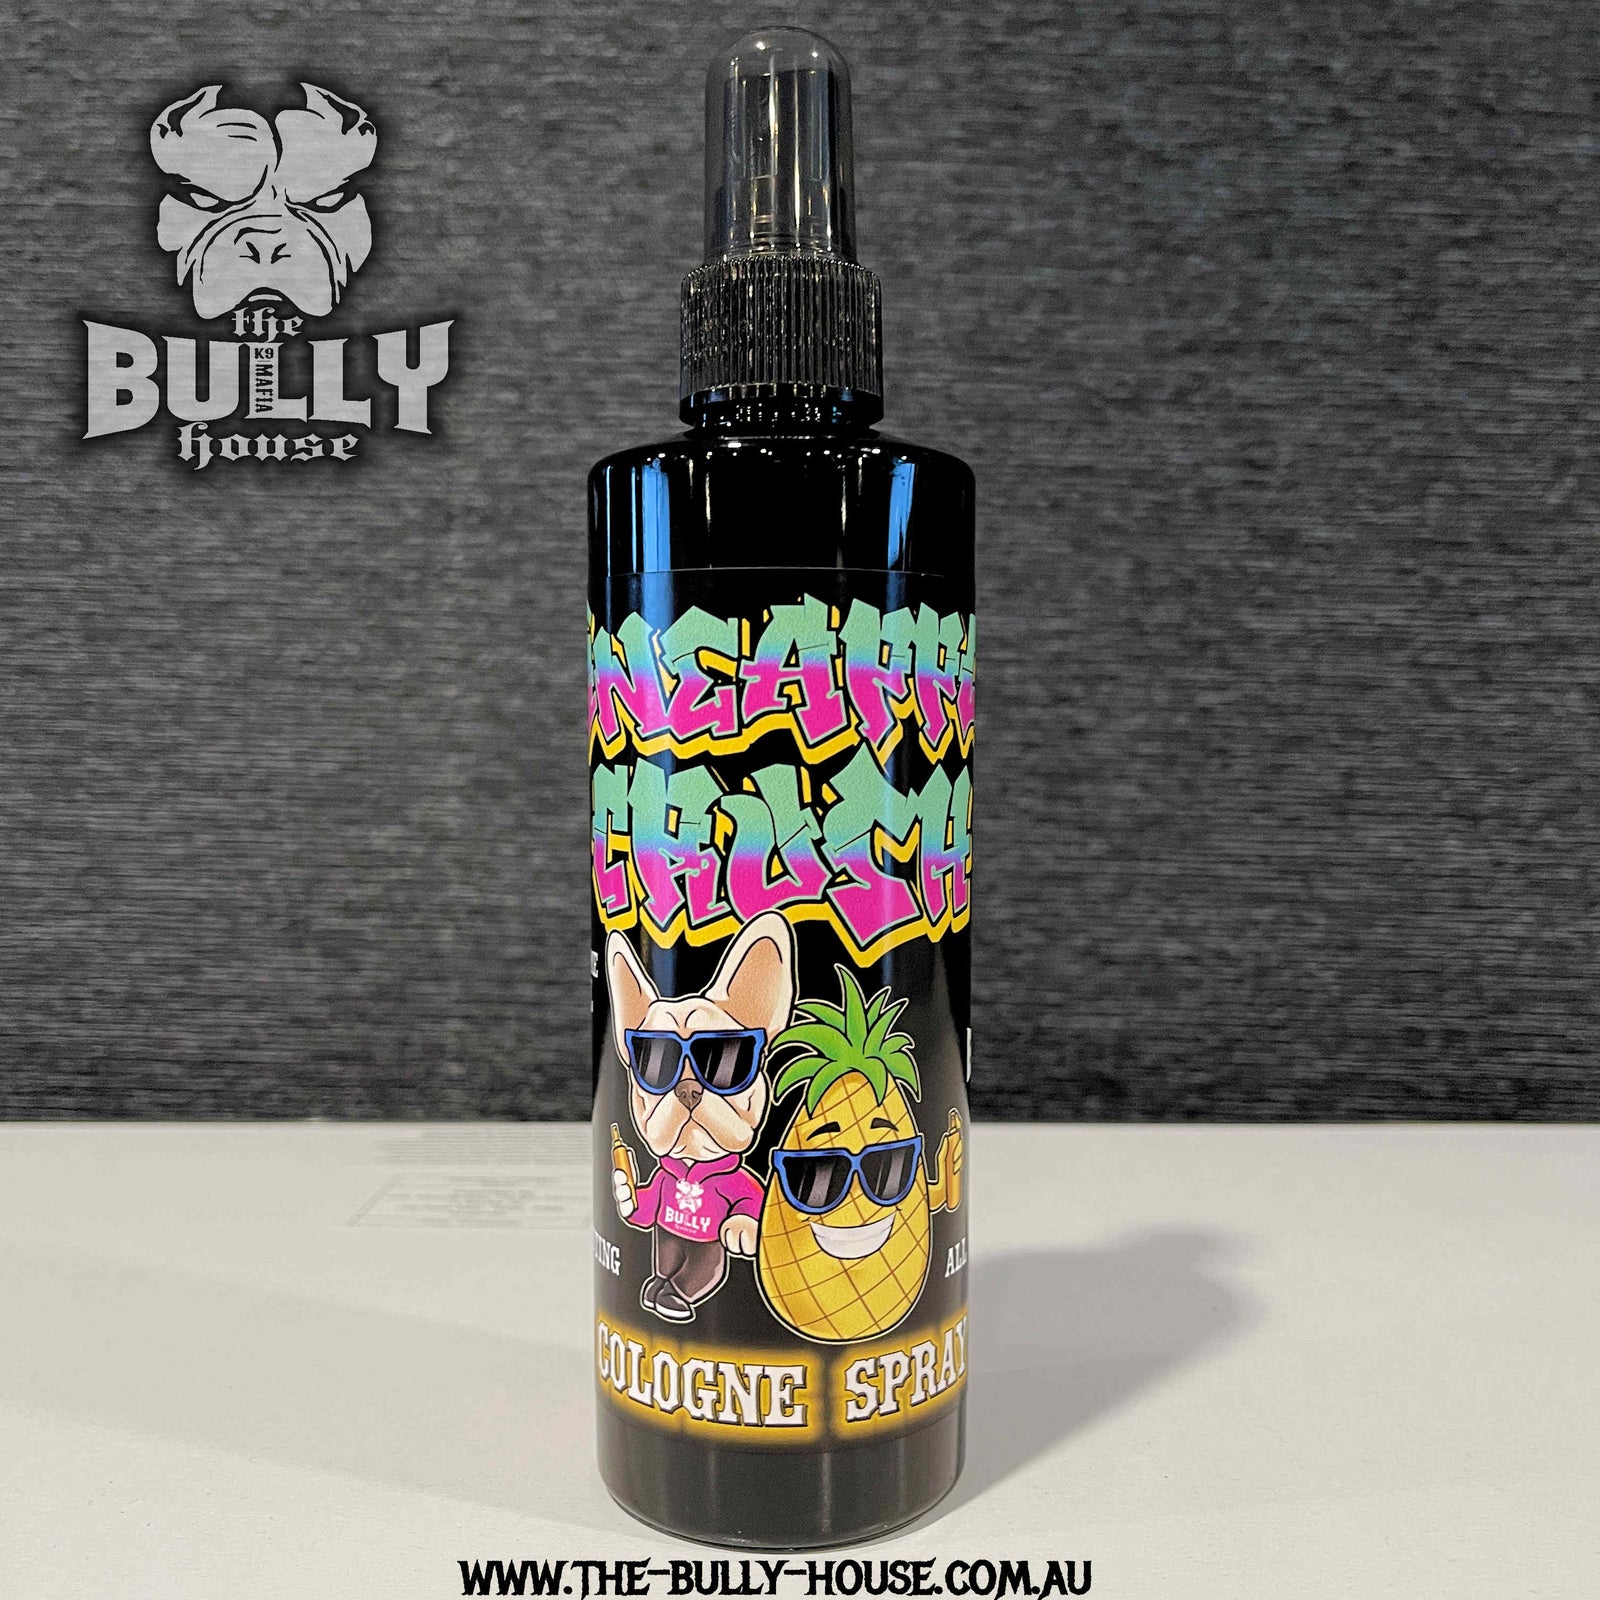 PINEAPPLE CRUSH - 250ml Dog/Puppy COLOGNE SPRAY - OUR FAMOUS SIGNATURE FRAGRANCE